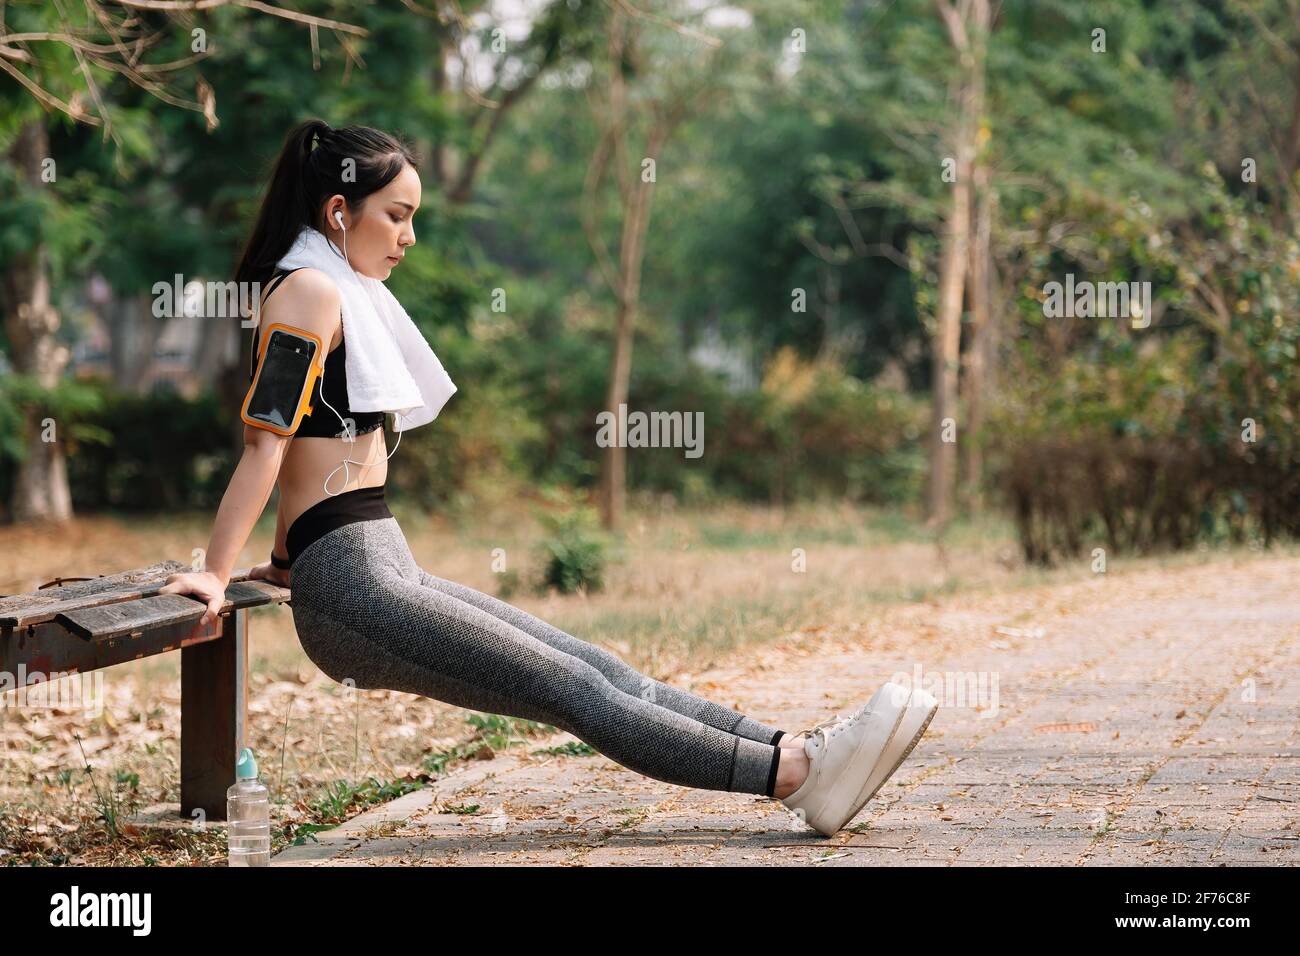 fitness, sport, exercising and lifestyle concept - woman stretching leg on stands. Stock Photo